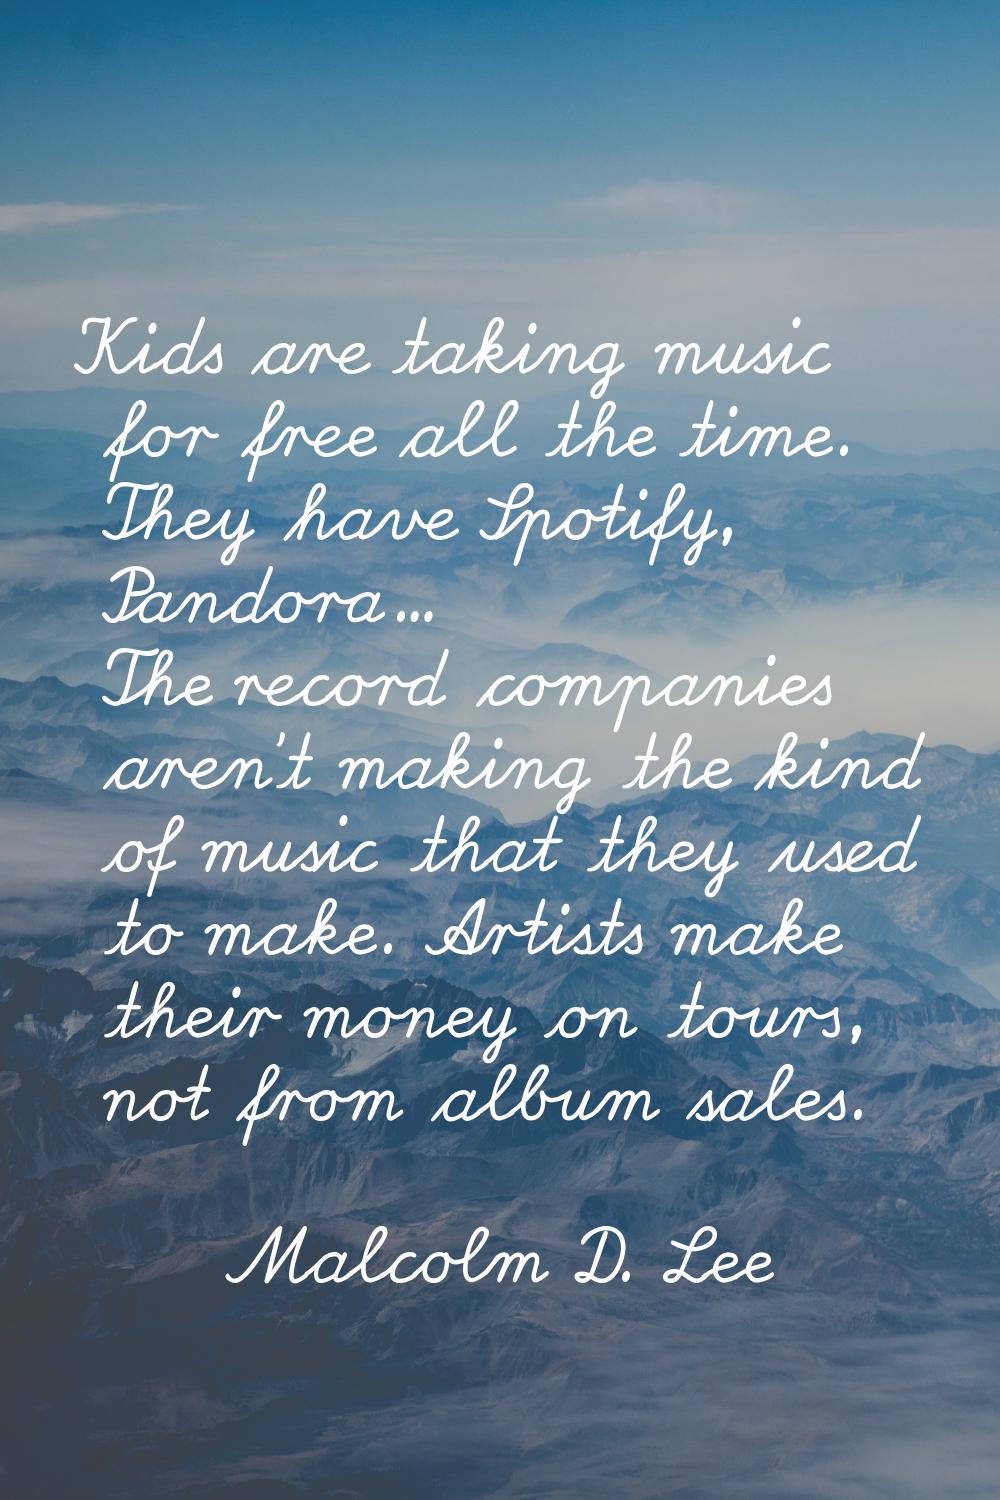 Kids are taking music for free all the time. They have Spotify, Pandora... The record companies are